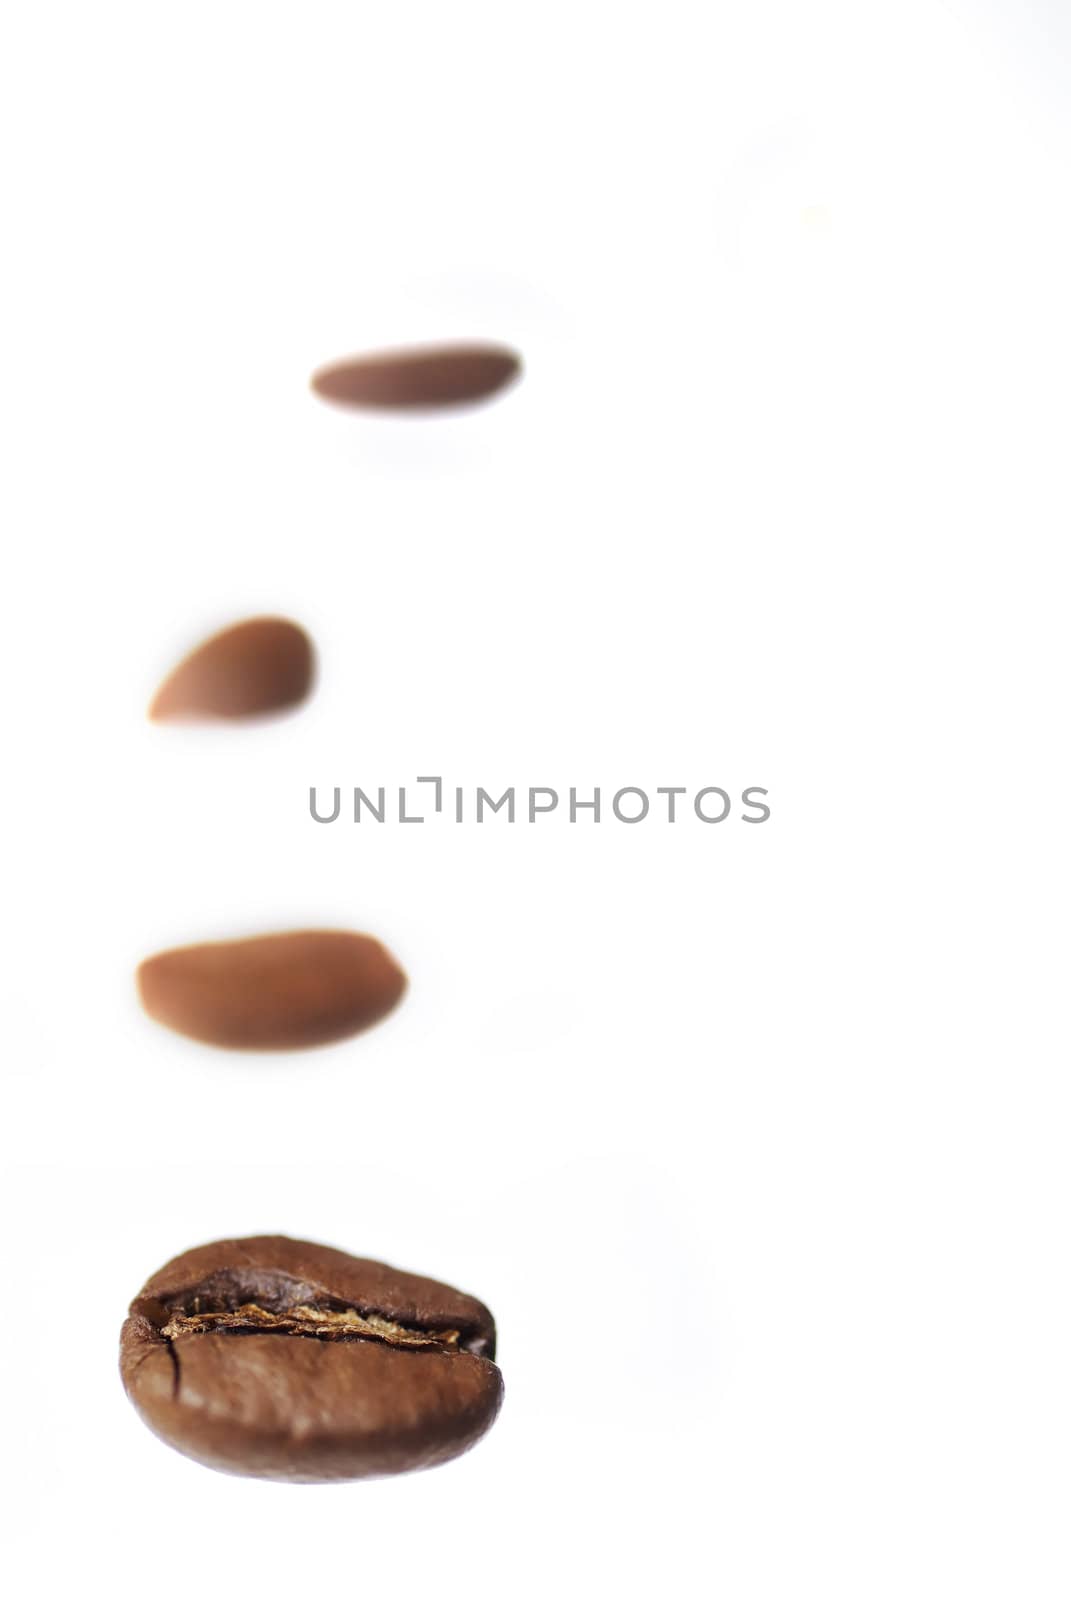 Row of arabica coffee beans on white background.